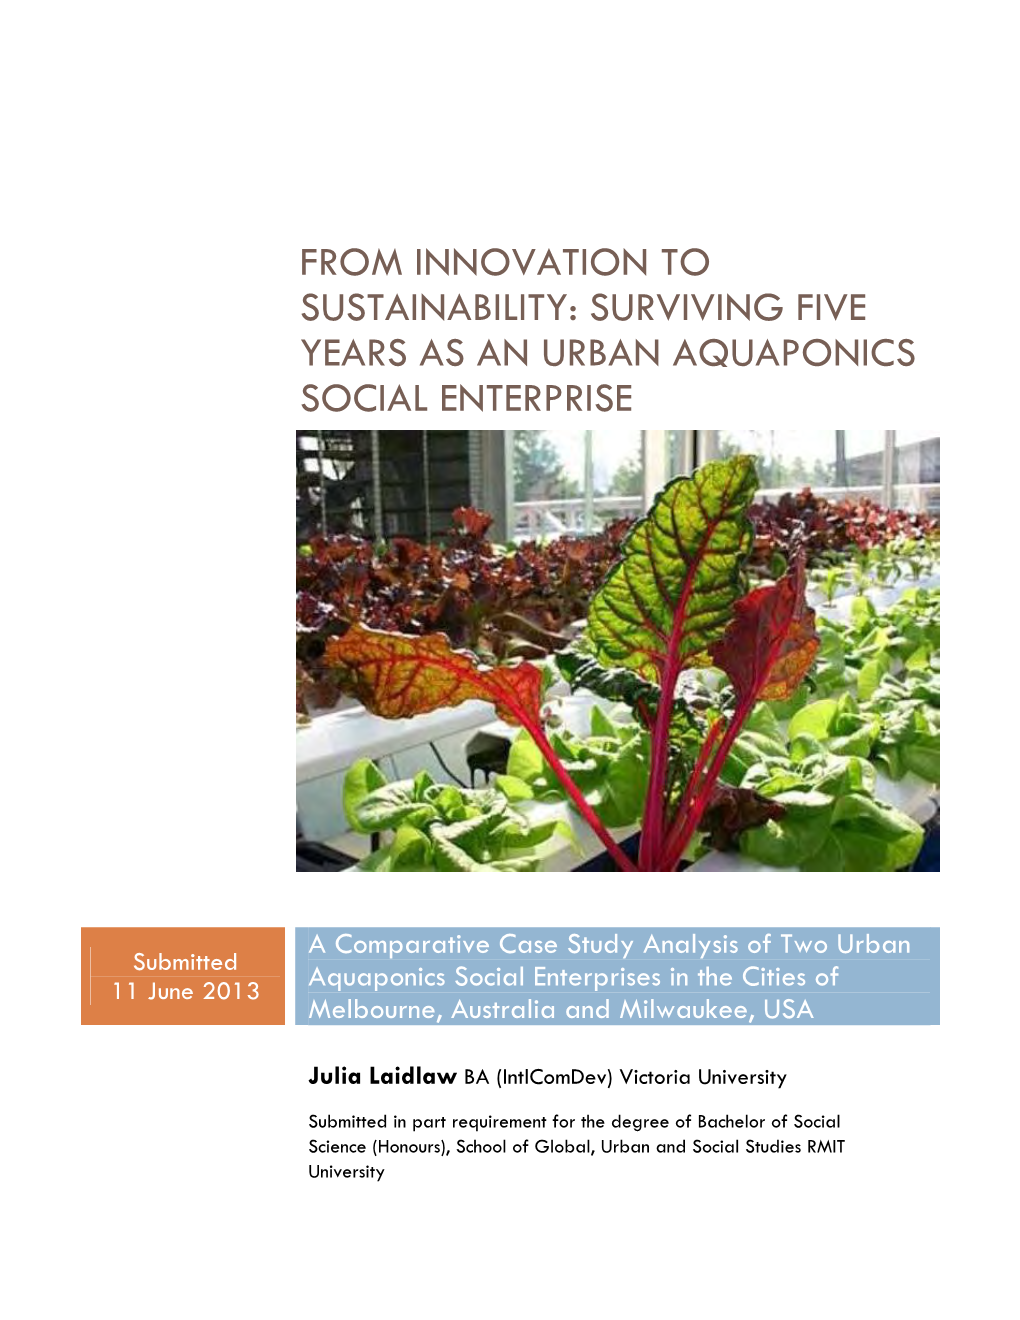 From Innovation to Sustainability: Surviving Five Years As an Urban Aquaponics Social Enterprise